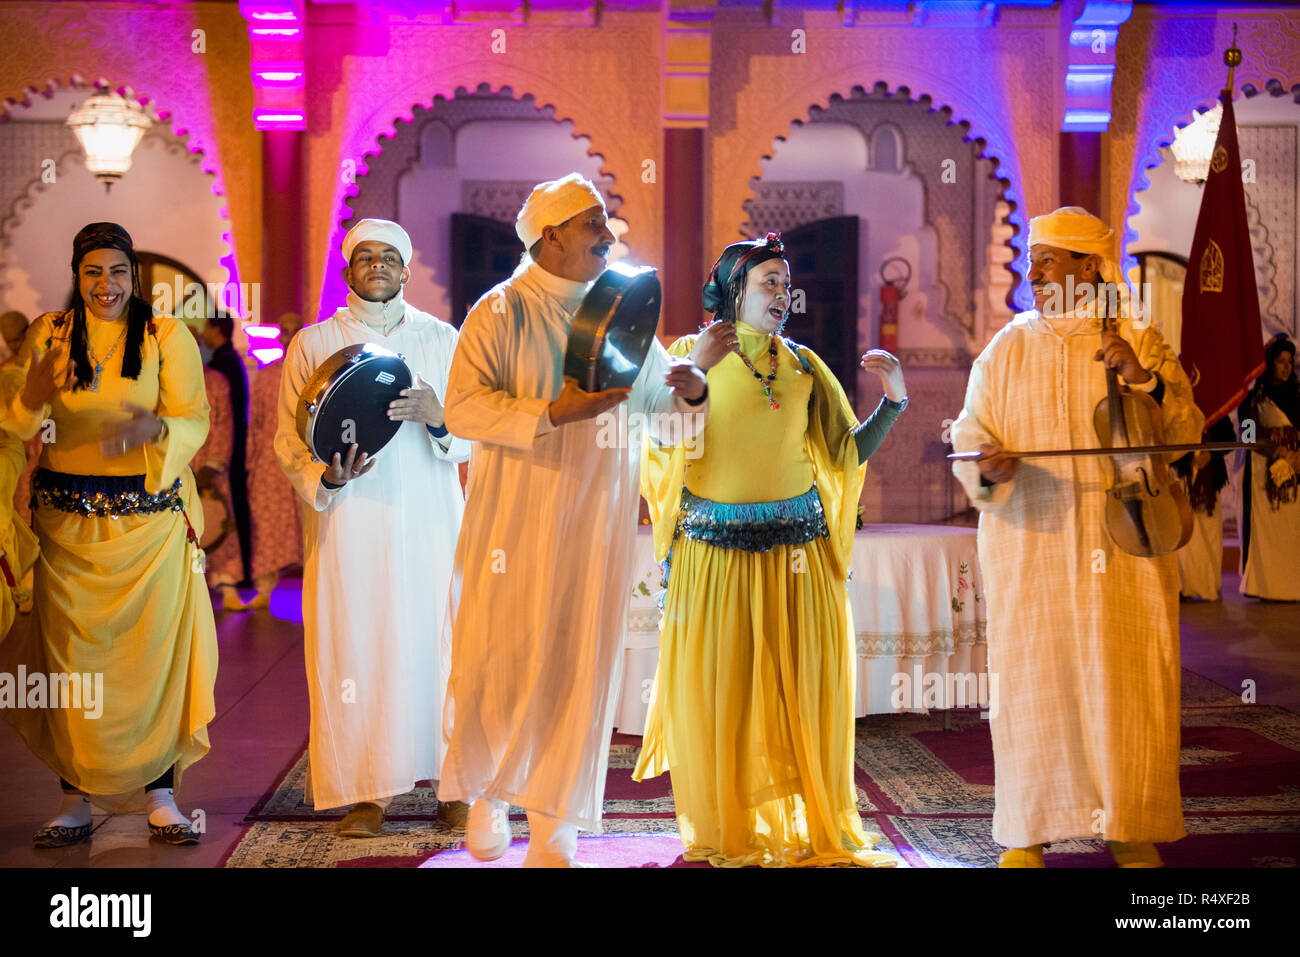 26-02-15, Marrakech, Morocco. Tourist entertainment at the Chez Ali Fantasia show. Guests are entertained by the songs and dances of folk groups, a be Stock Photo